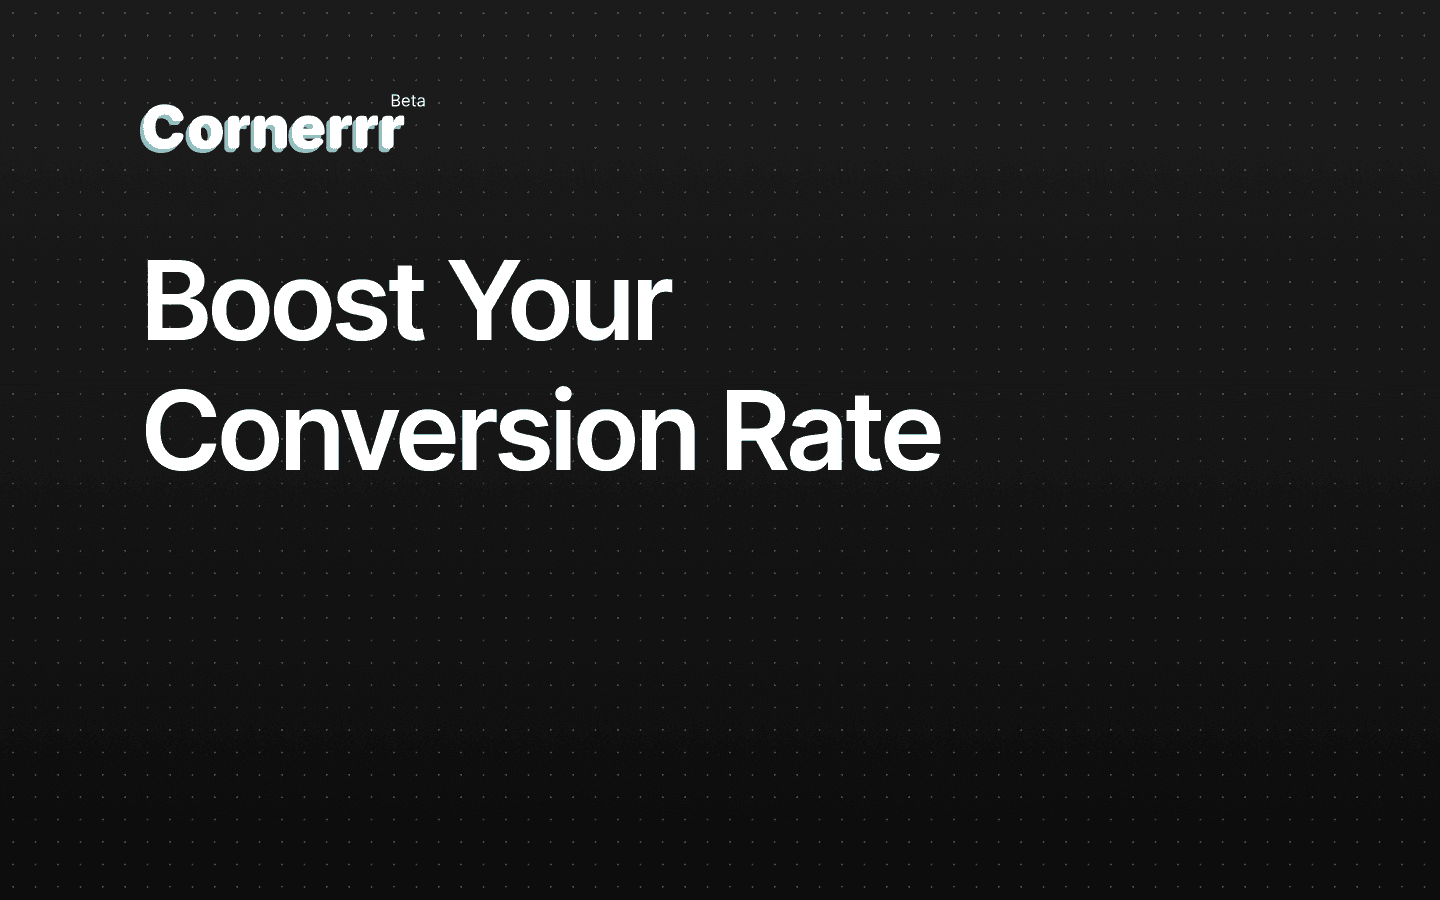 Boost your conversion rate